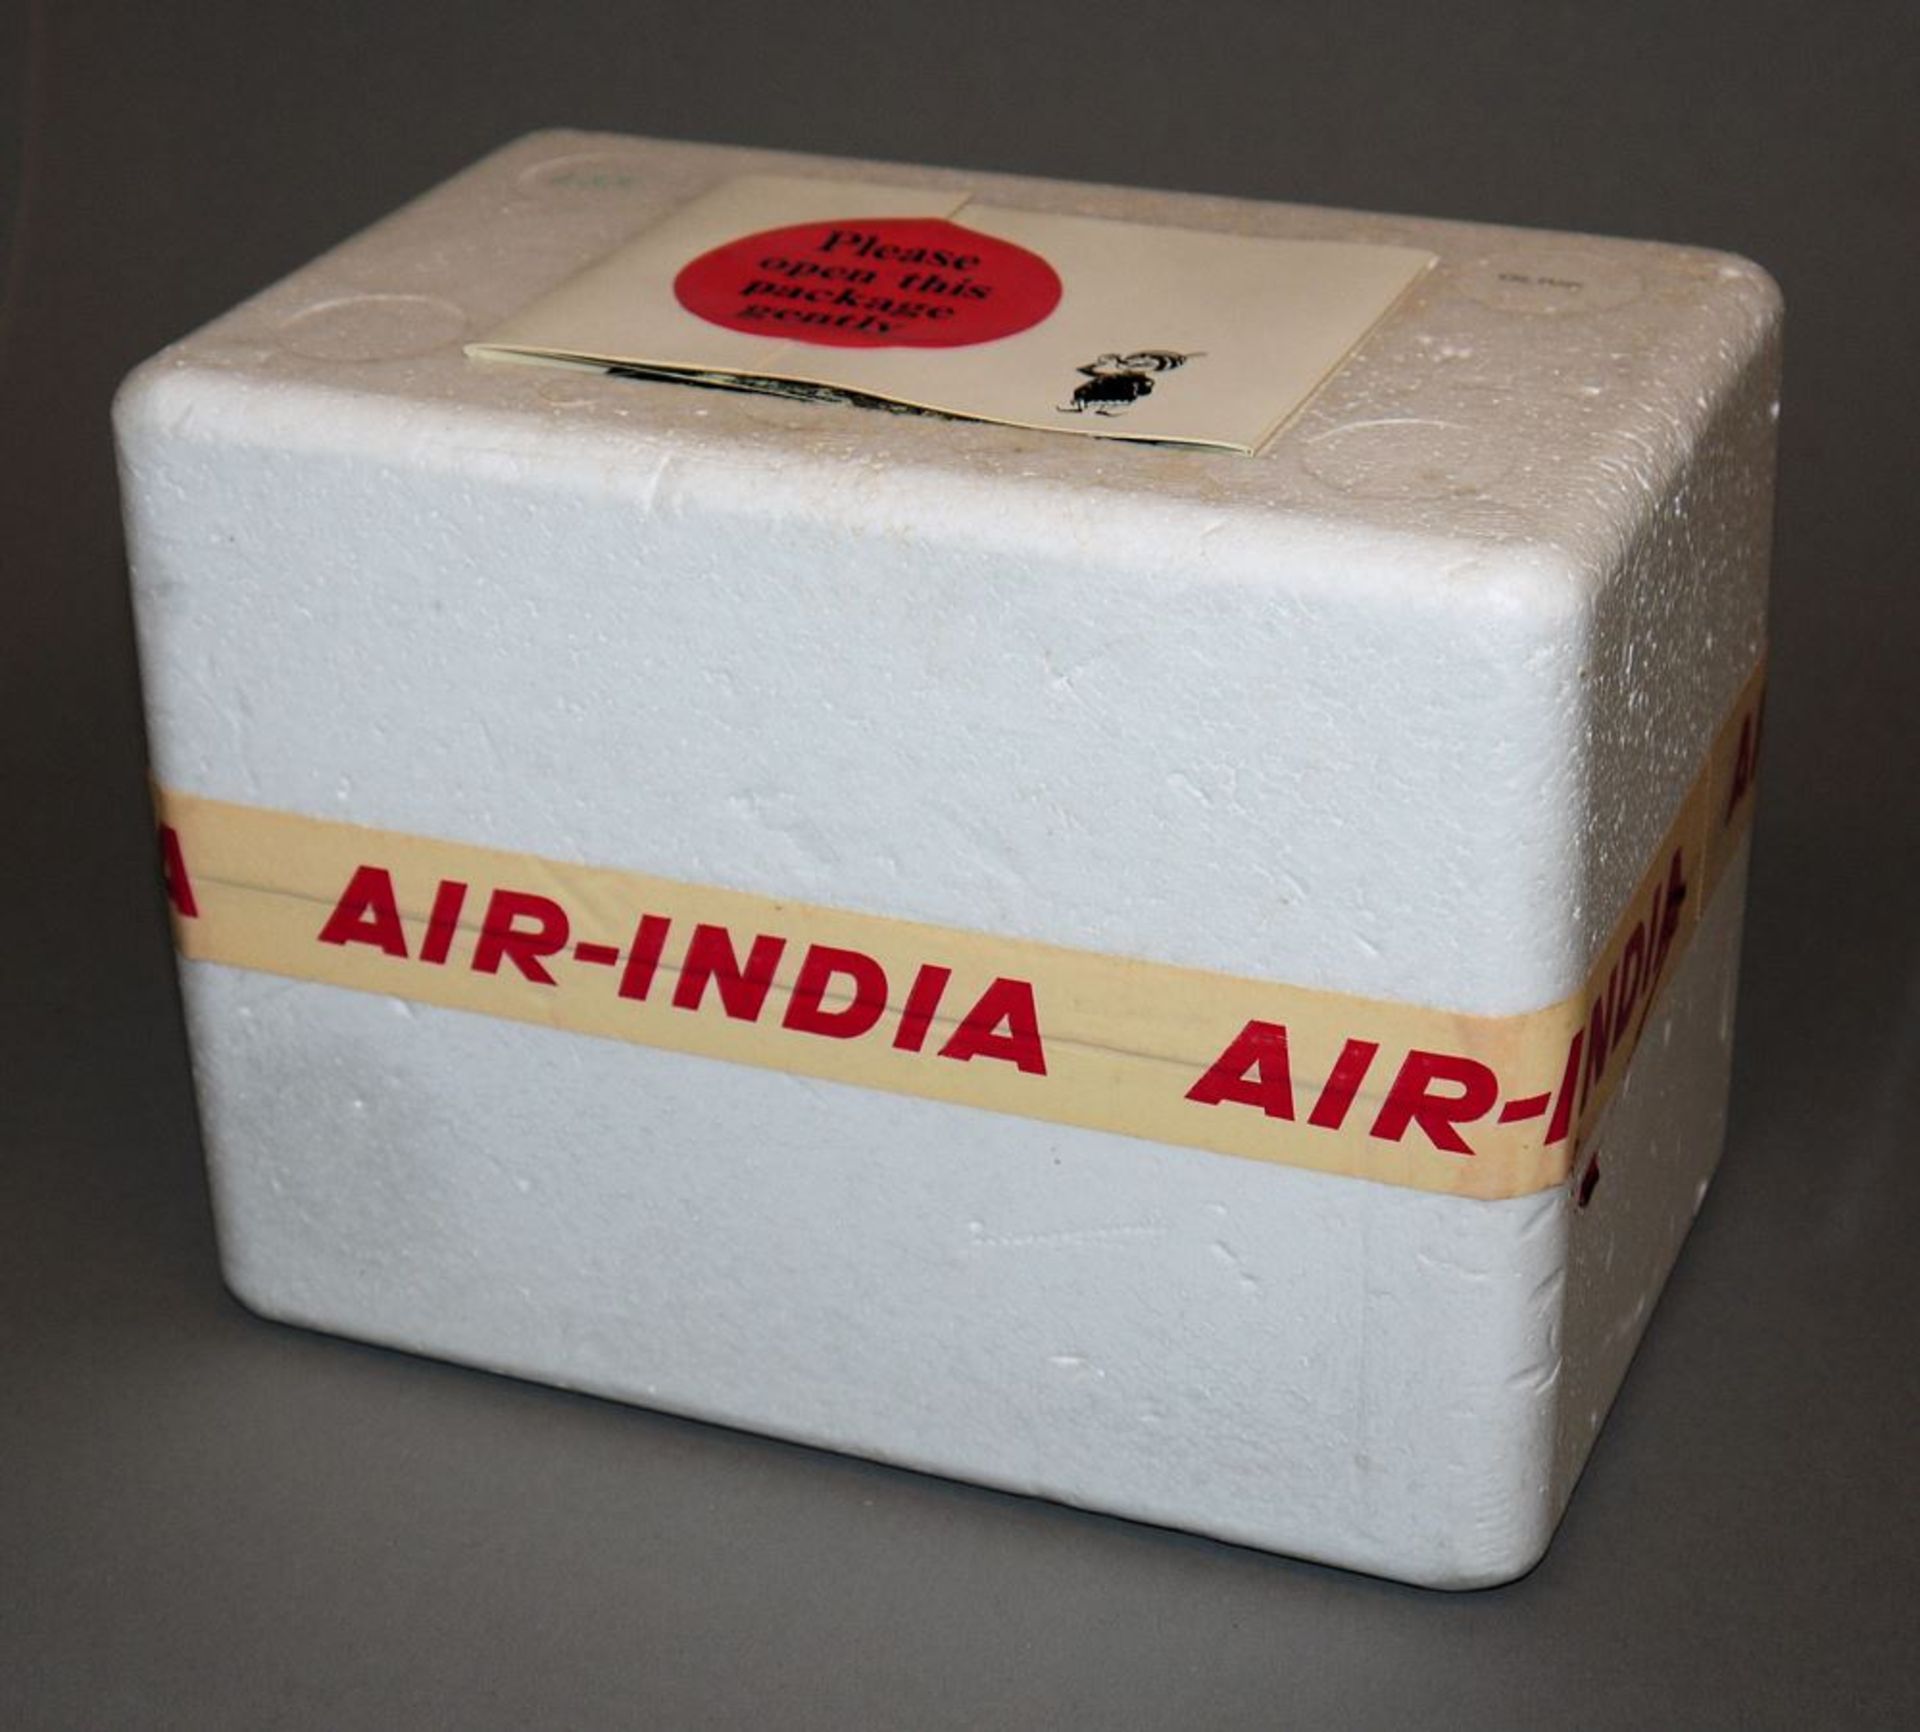 Salvador Dali, "Swan Elephant Ashtray" for AIR INDIA 1967, sealed in a gift box - Image 2 of 4